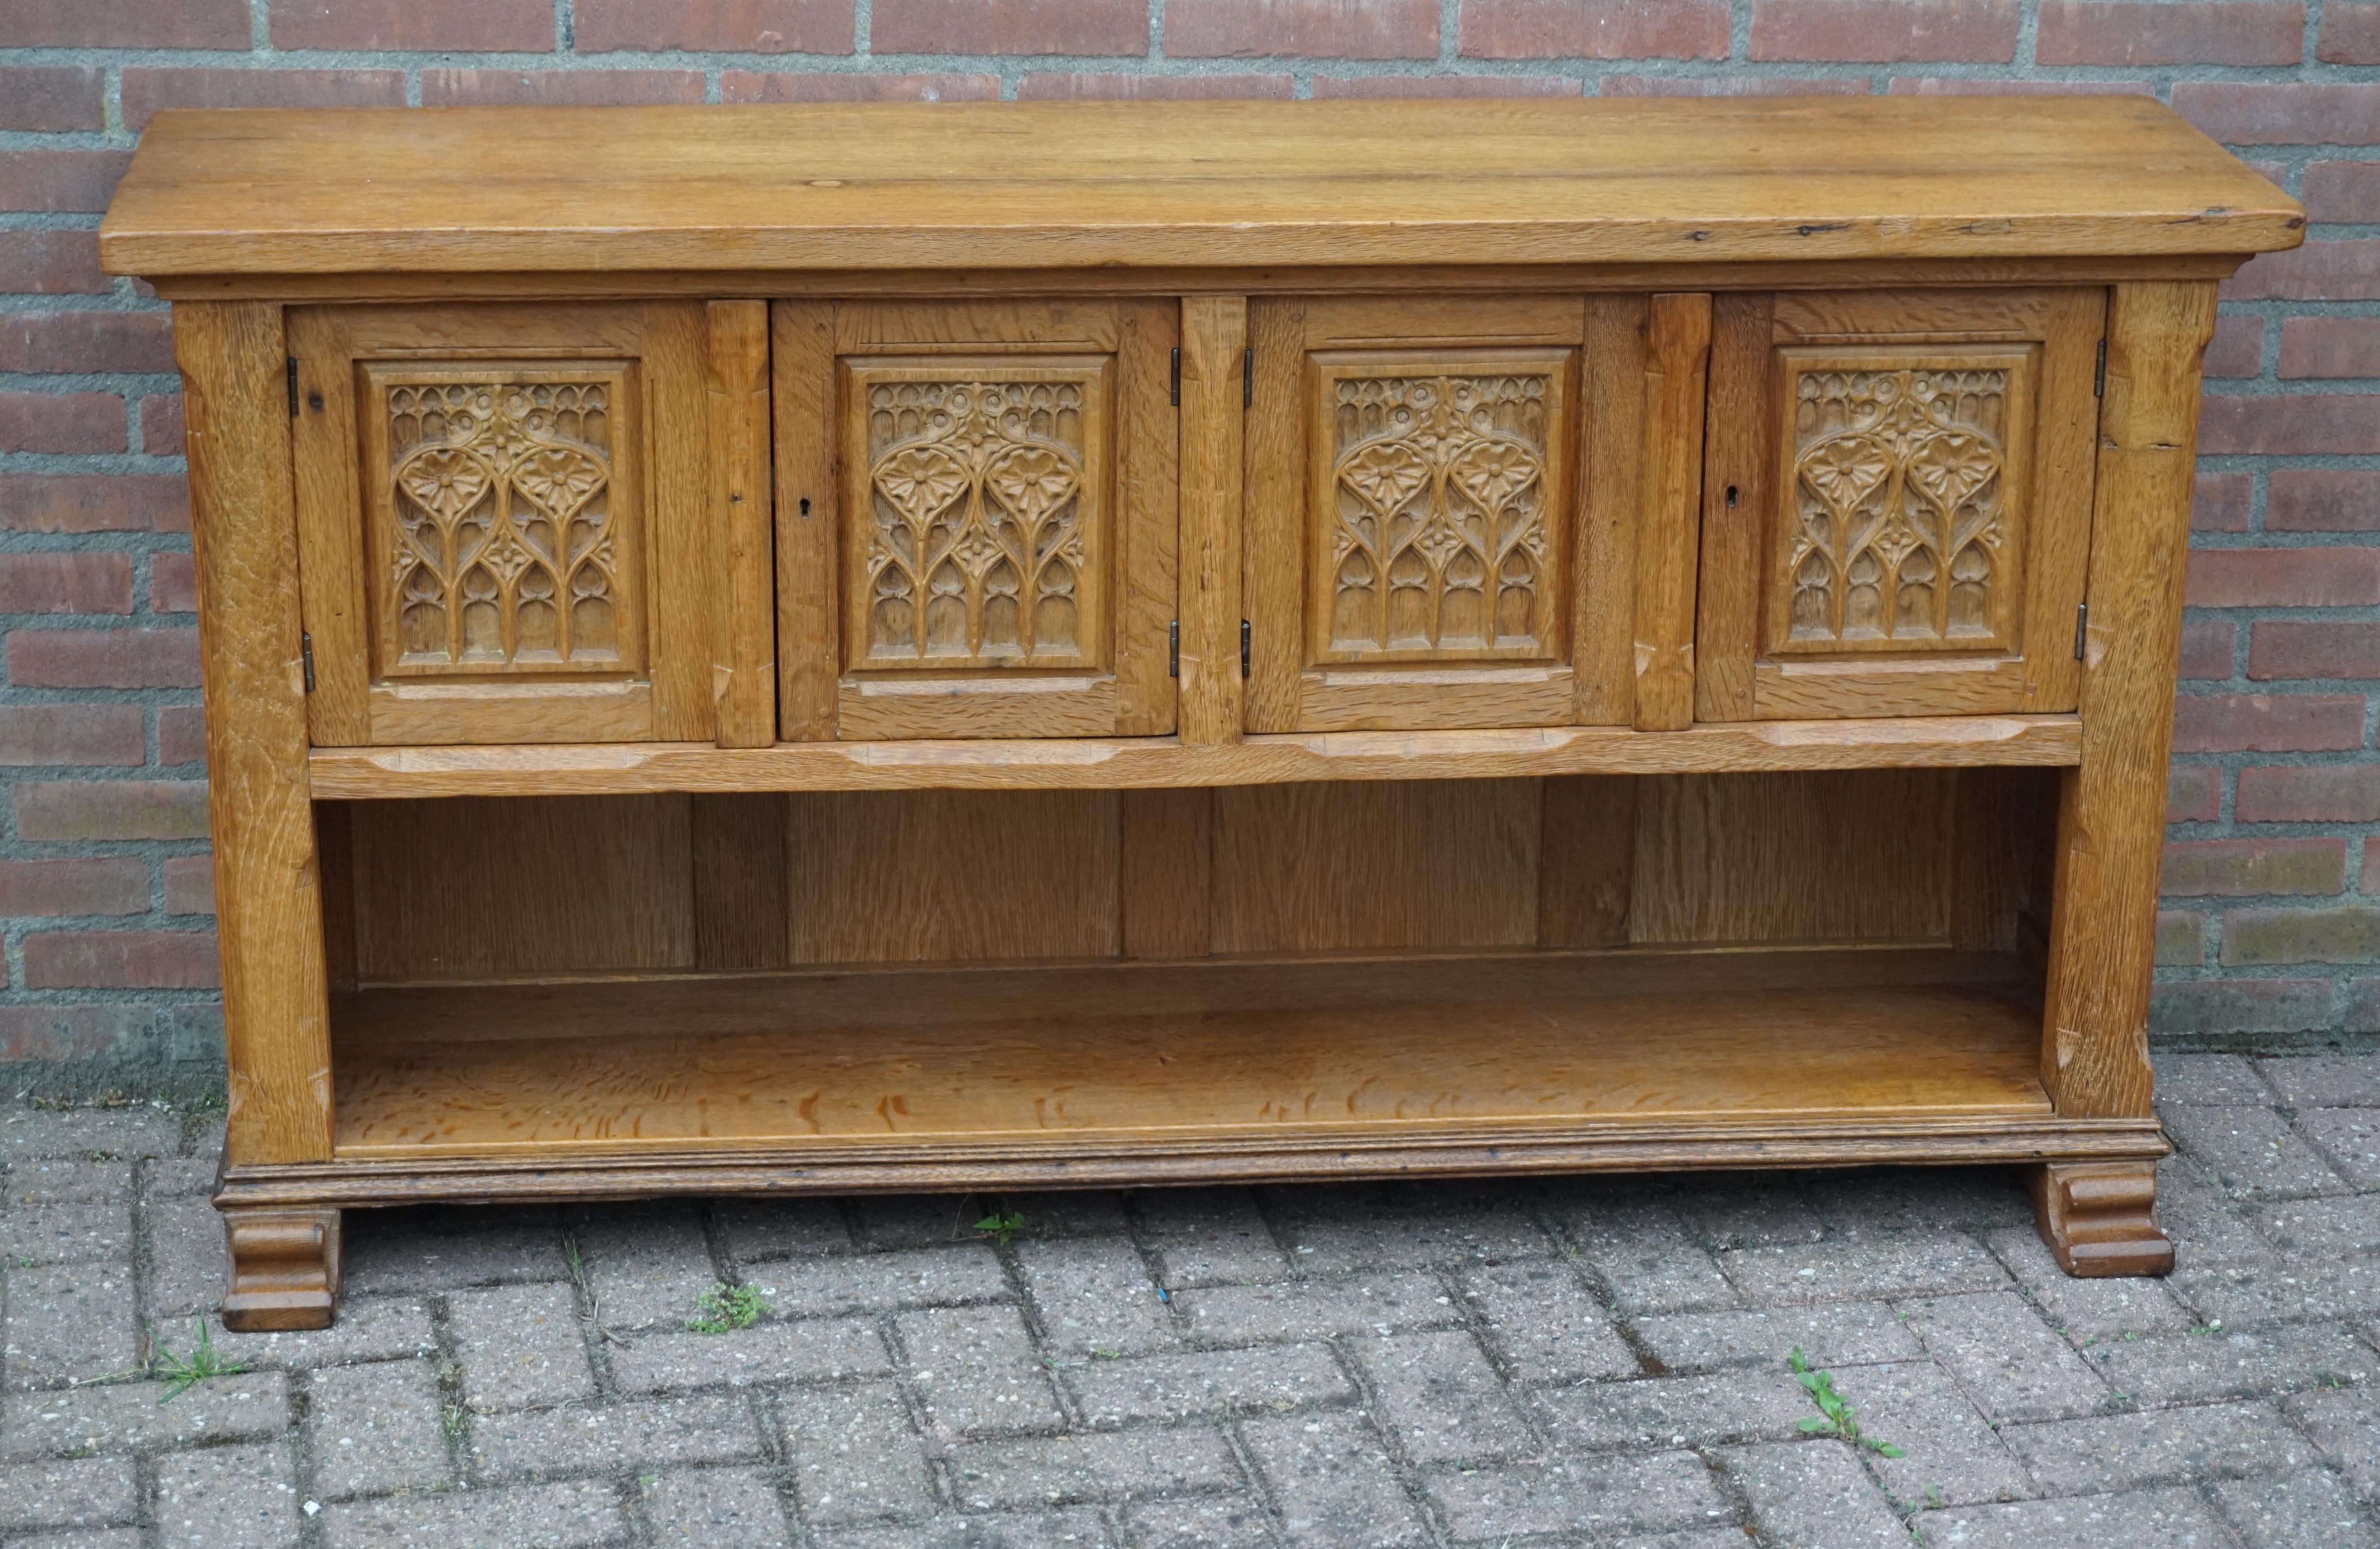 Beautiful and practical, half open design credenza.

This antique Gothic Revival cabinet can be placed tight on your wall and thanks to its wide and undeep design this medieval style beauty can be placed almost anywhere without taking up too much